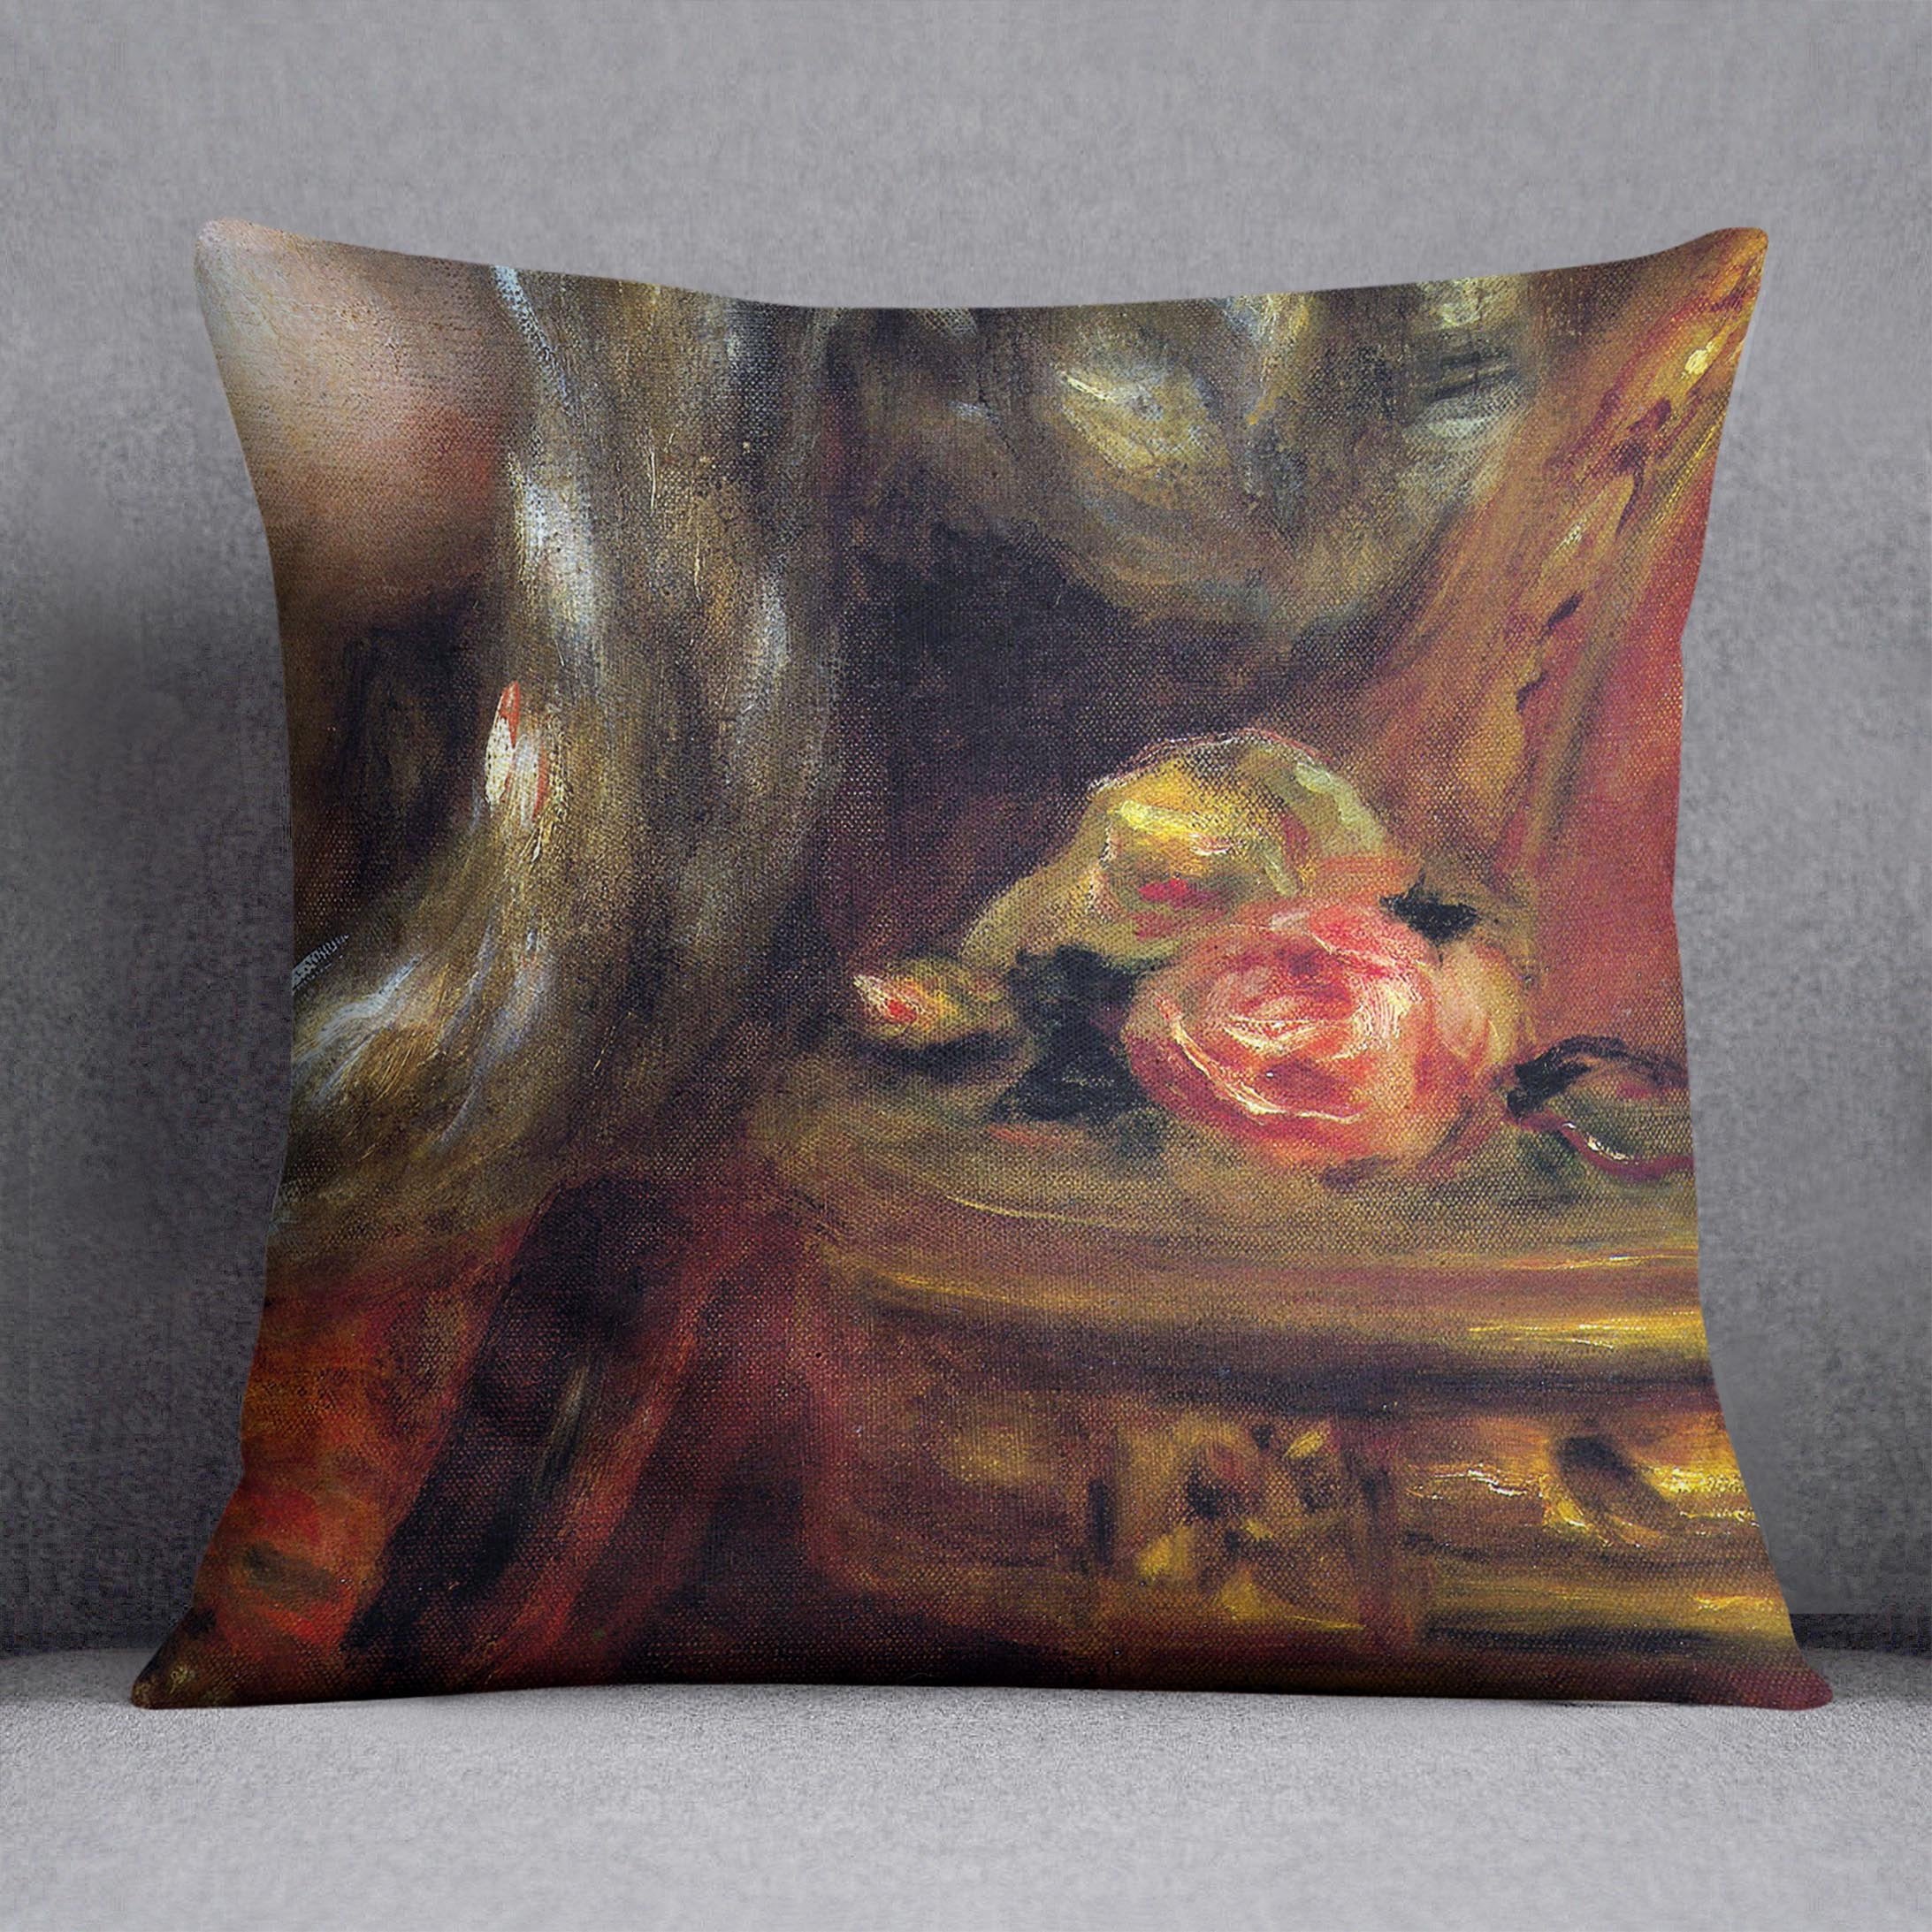 Gabrielle with jewels detail by Renoir Throw Pillow